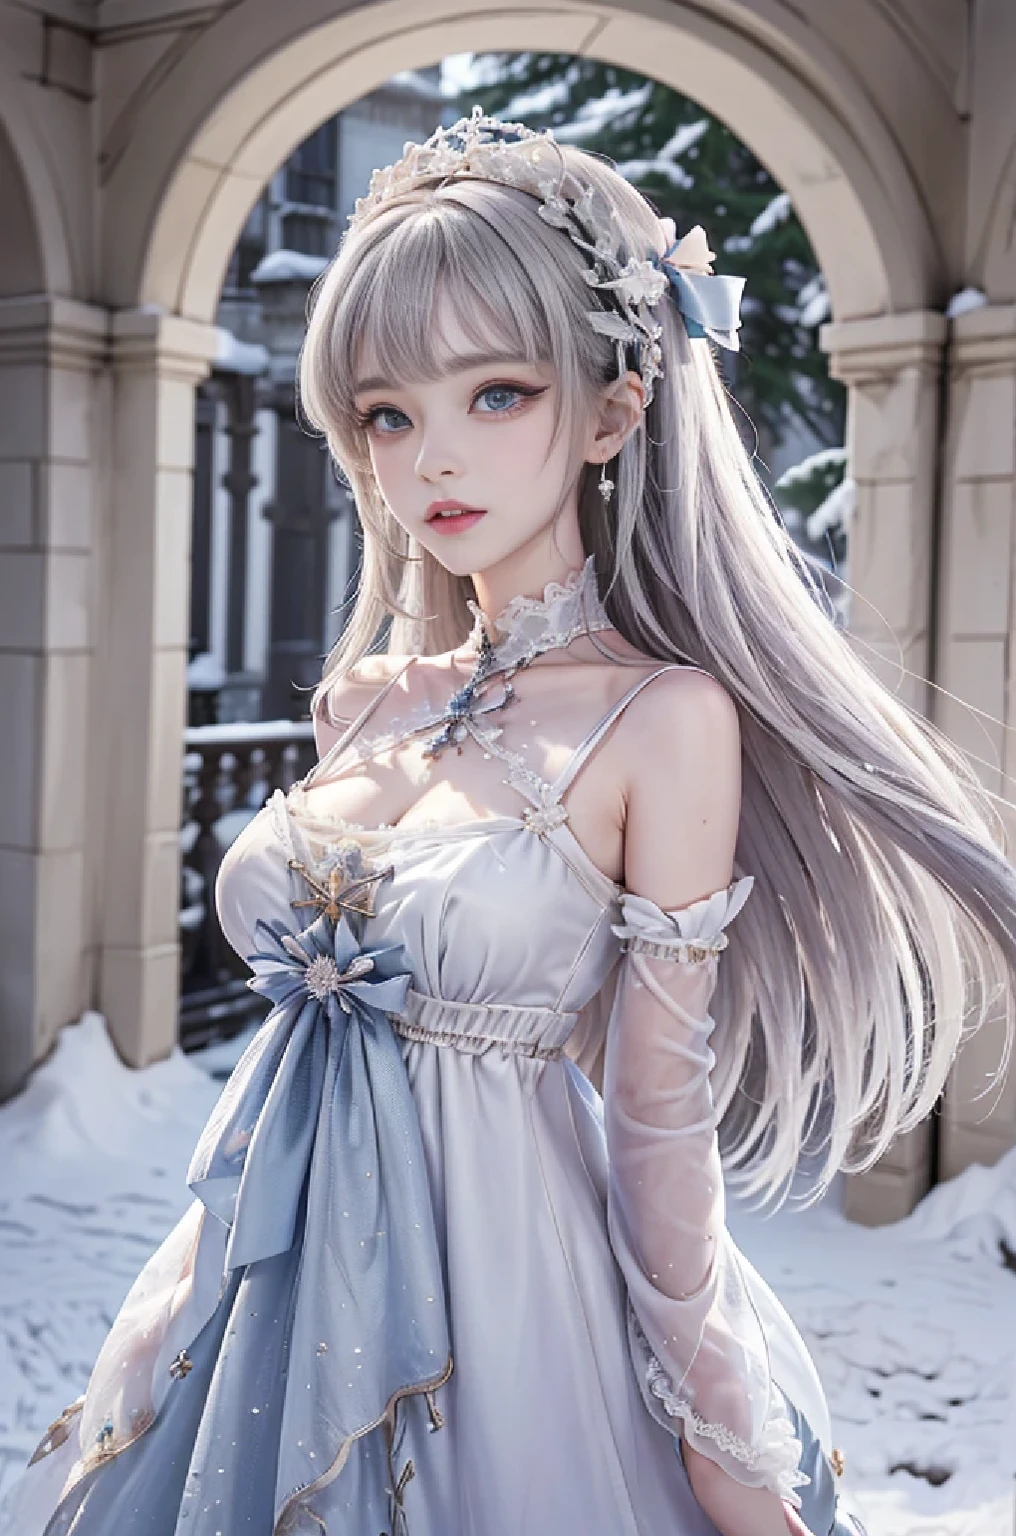 ((masterpiece:1.5,highest quality,Highly detailed images,Beautiful images、Realistic、Photorealistic、2.5D))(1girl, solo)(cute girl, medium breasts, white hair, aqua eyes、Beautiful big eyes、Sharp jaw、Small Nose、Narrow waist、Thin legs、Ideal body type、The collarbone is beautiful)(lolita fashion、Cape、Heavy coat、Snow Field、Gothic Style)(Beautiful, shining hair, floating hair)(heavy snow、dead tree)
